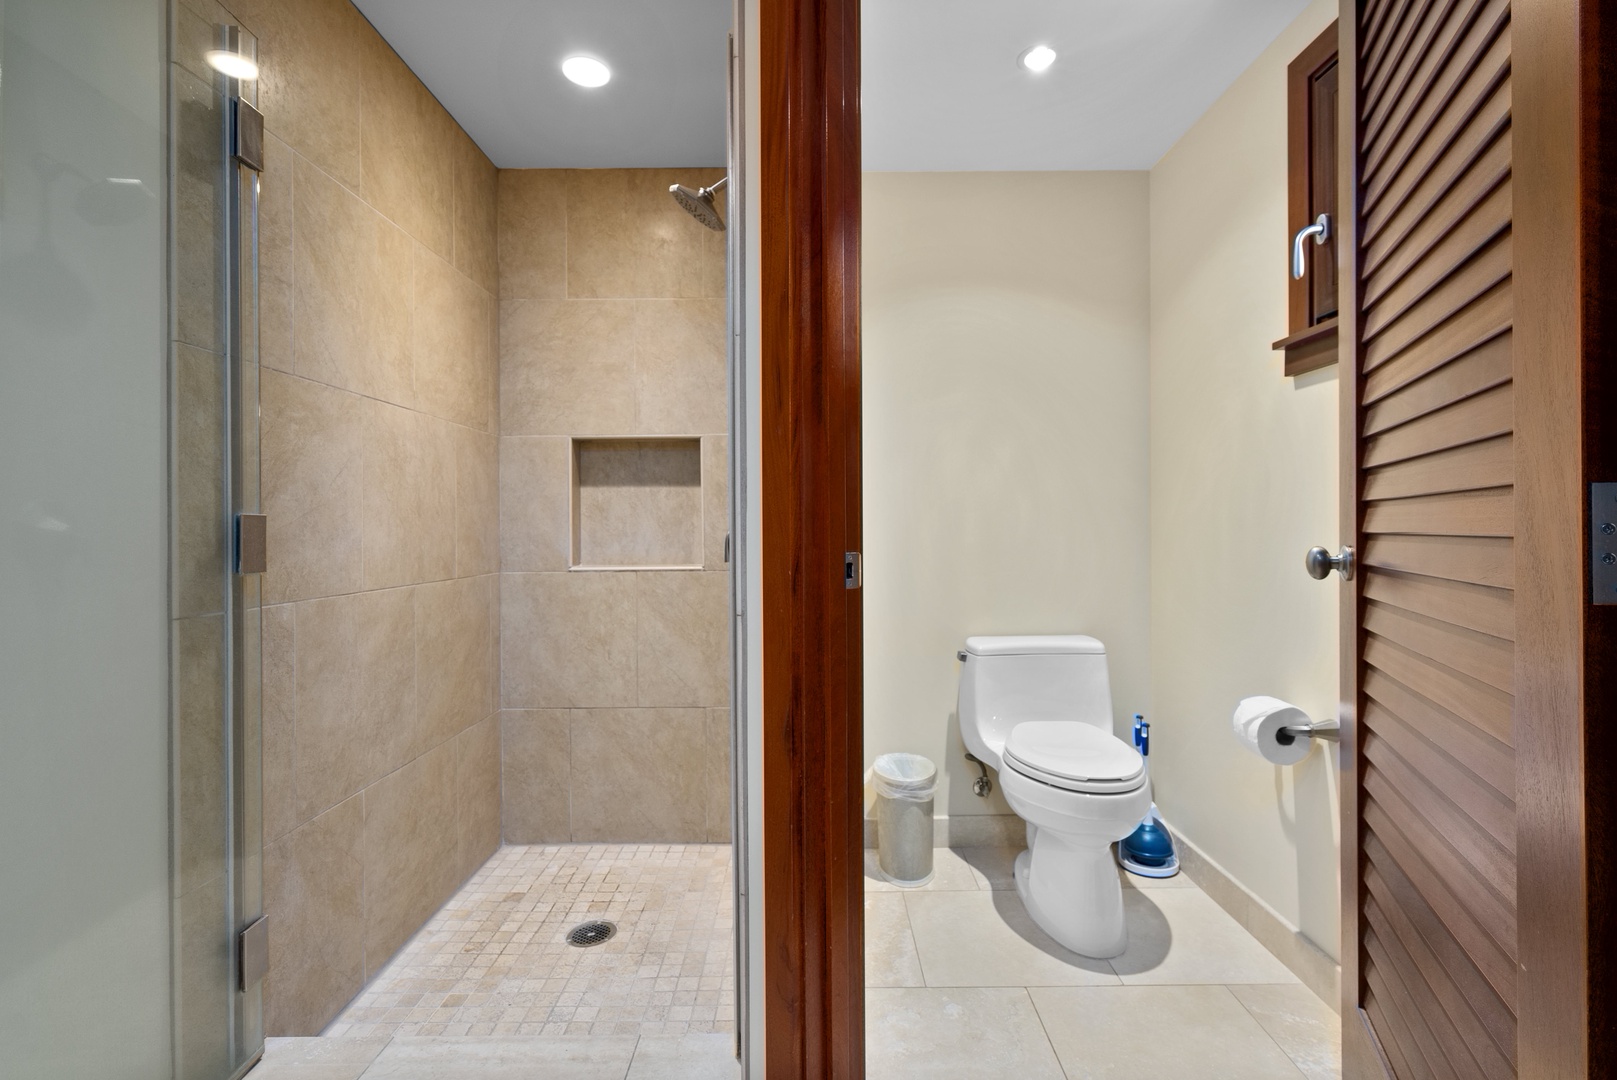 Primary bedroom's ensuite features a separate shower and toilet space